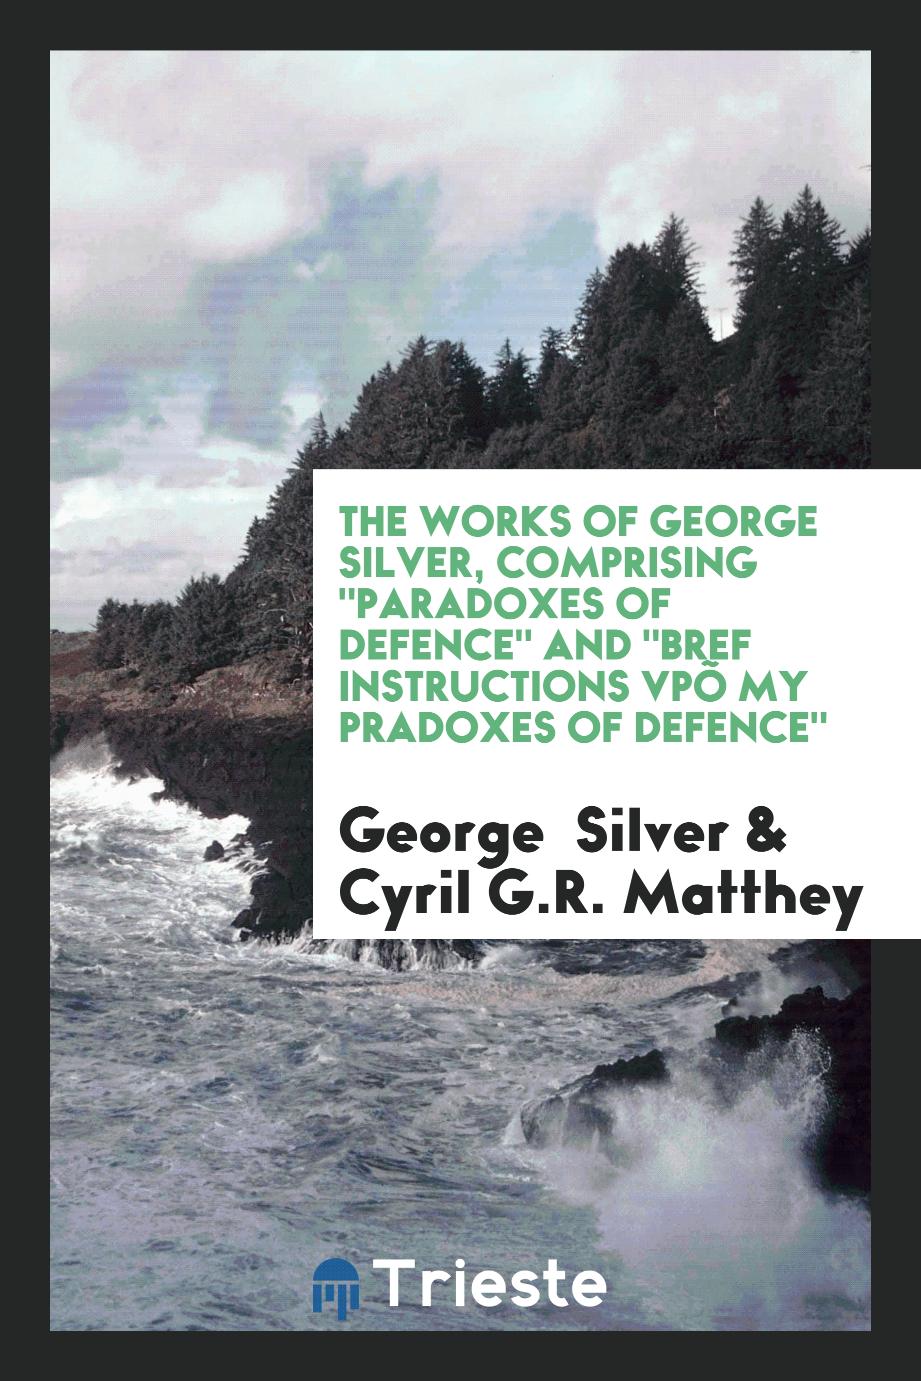 The Works of George Silver, Comprising "Paradoxes of Defence" and "Bref Instructions vpõ My Pradoxes of Defence"